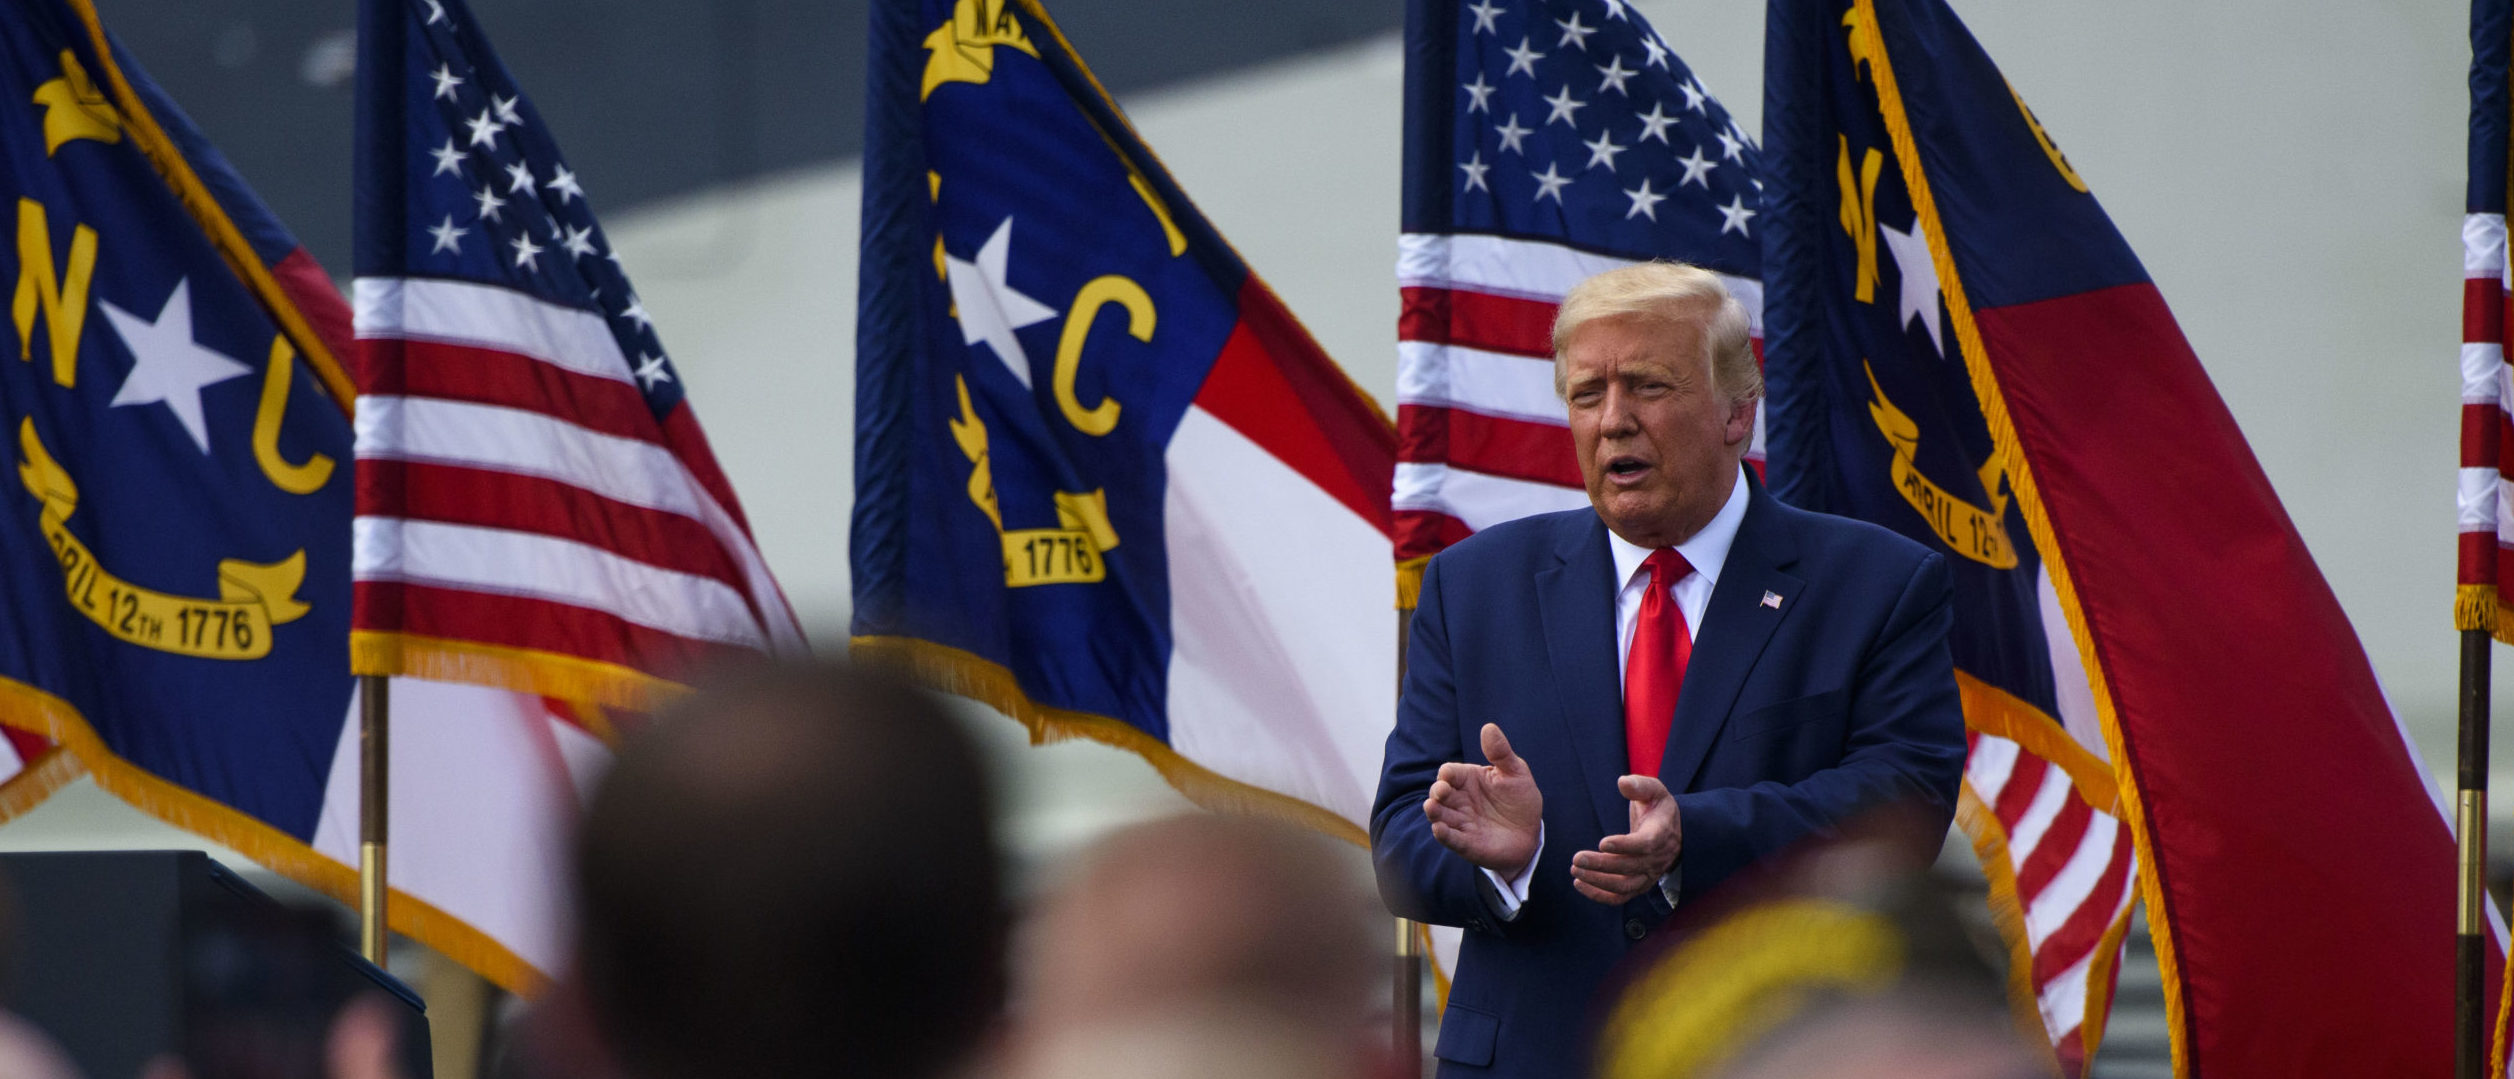 Trump Holds Tele-Rally For North Carolina, Says Biden Is A ‘Puppet’ Of ‘Radical Left-Wing’ thumbnail